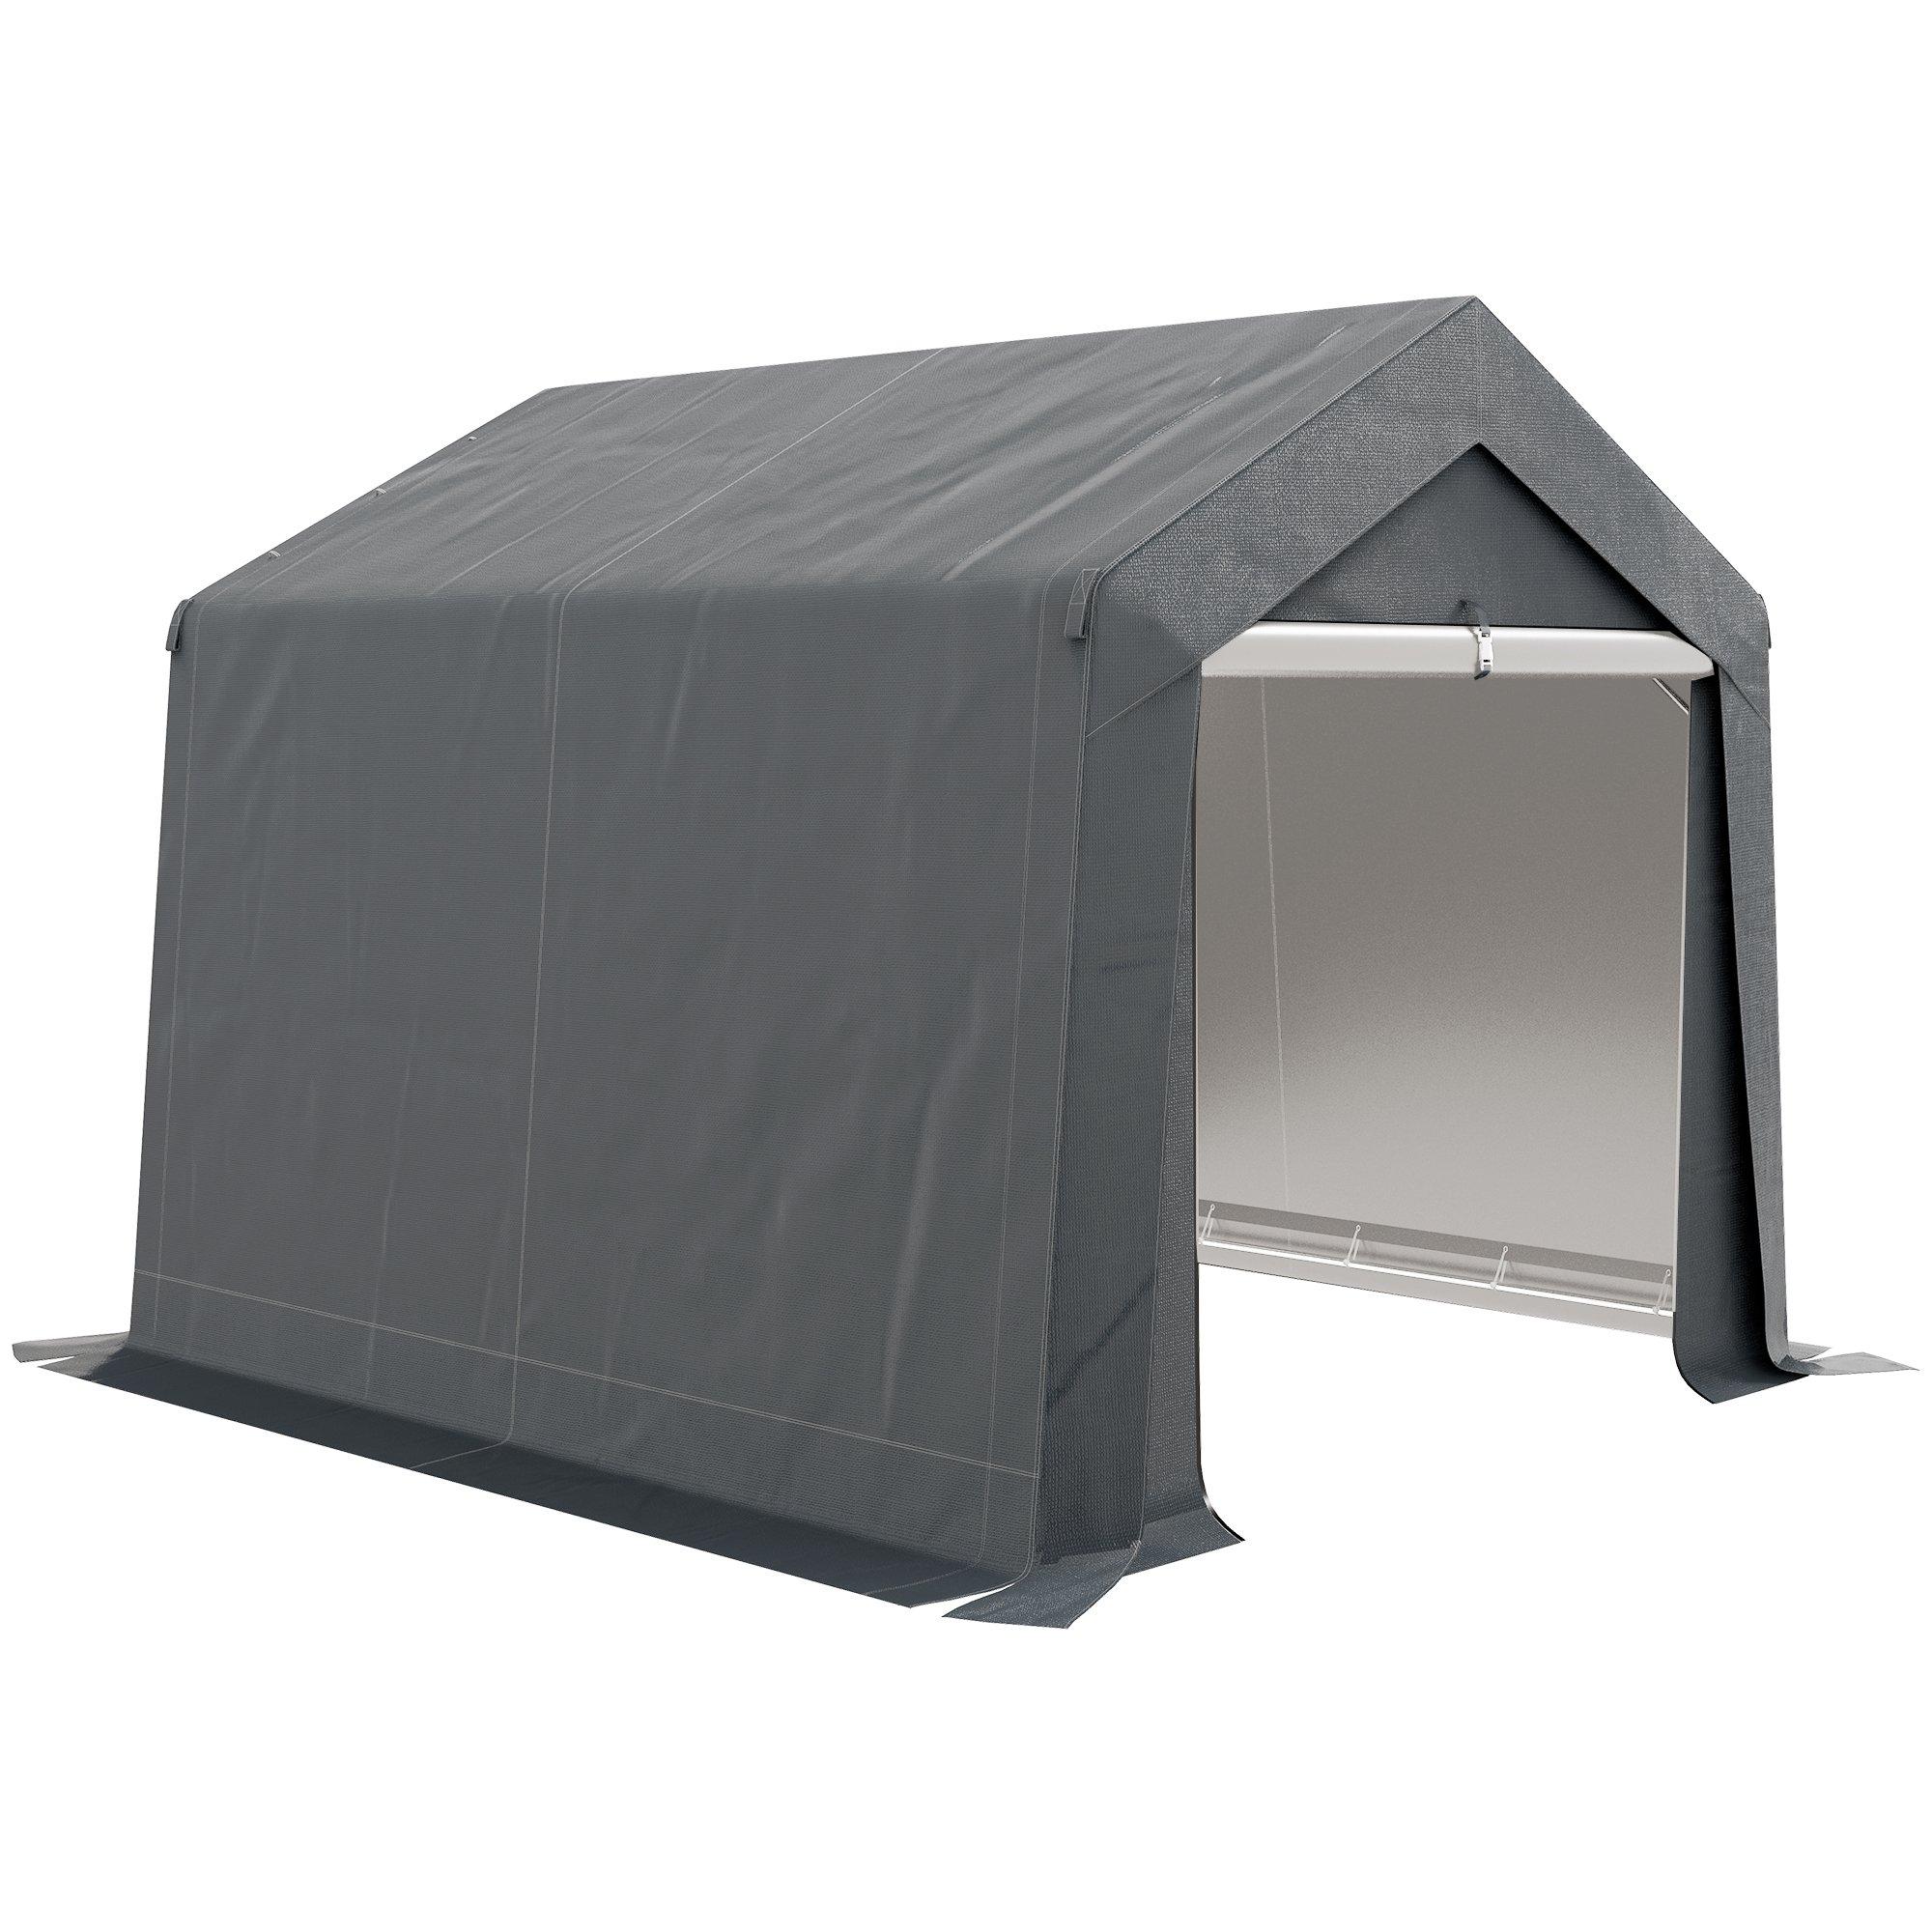 3 x 3(m) Garden Storage Shed, Waterproof and Heavy Duty Portable Shed